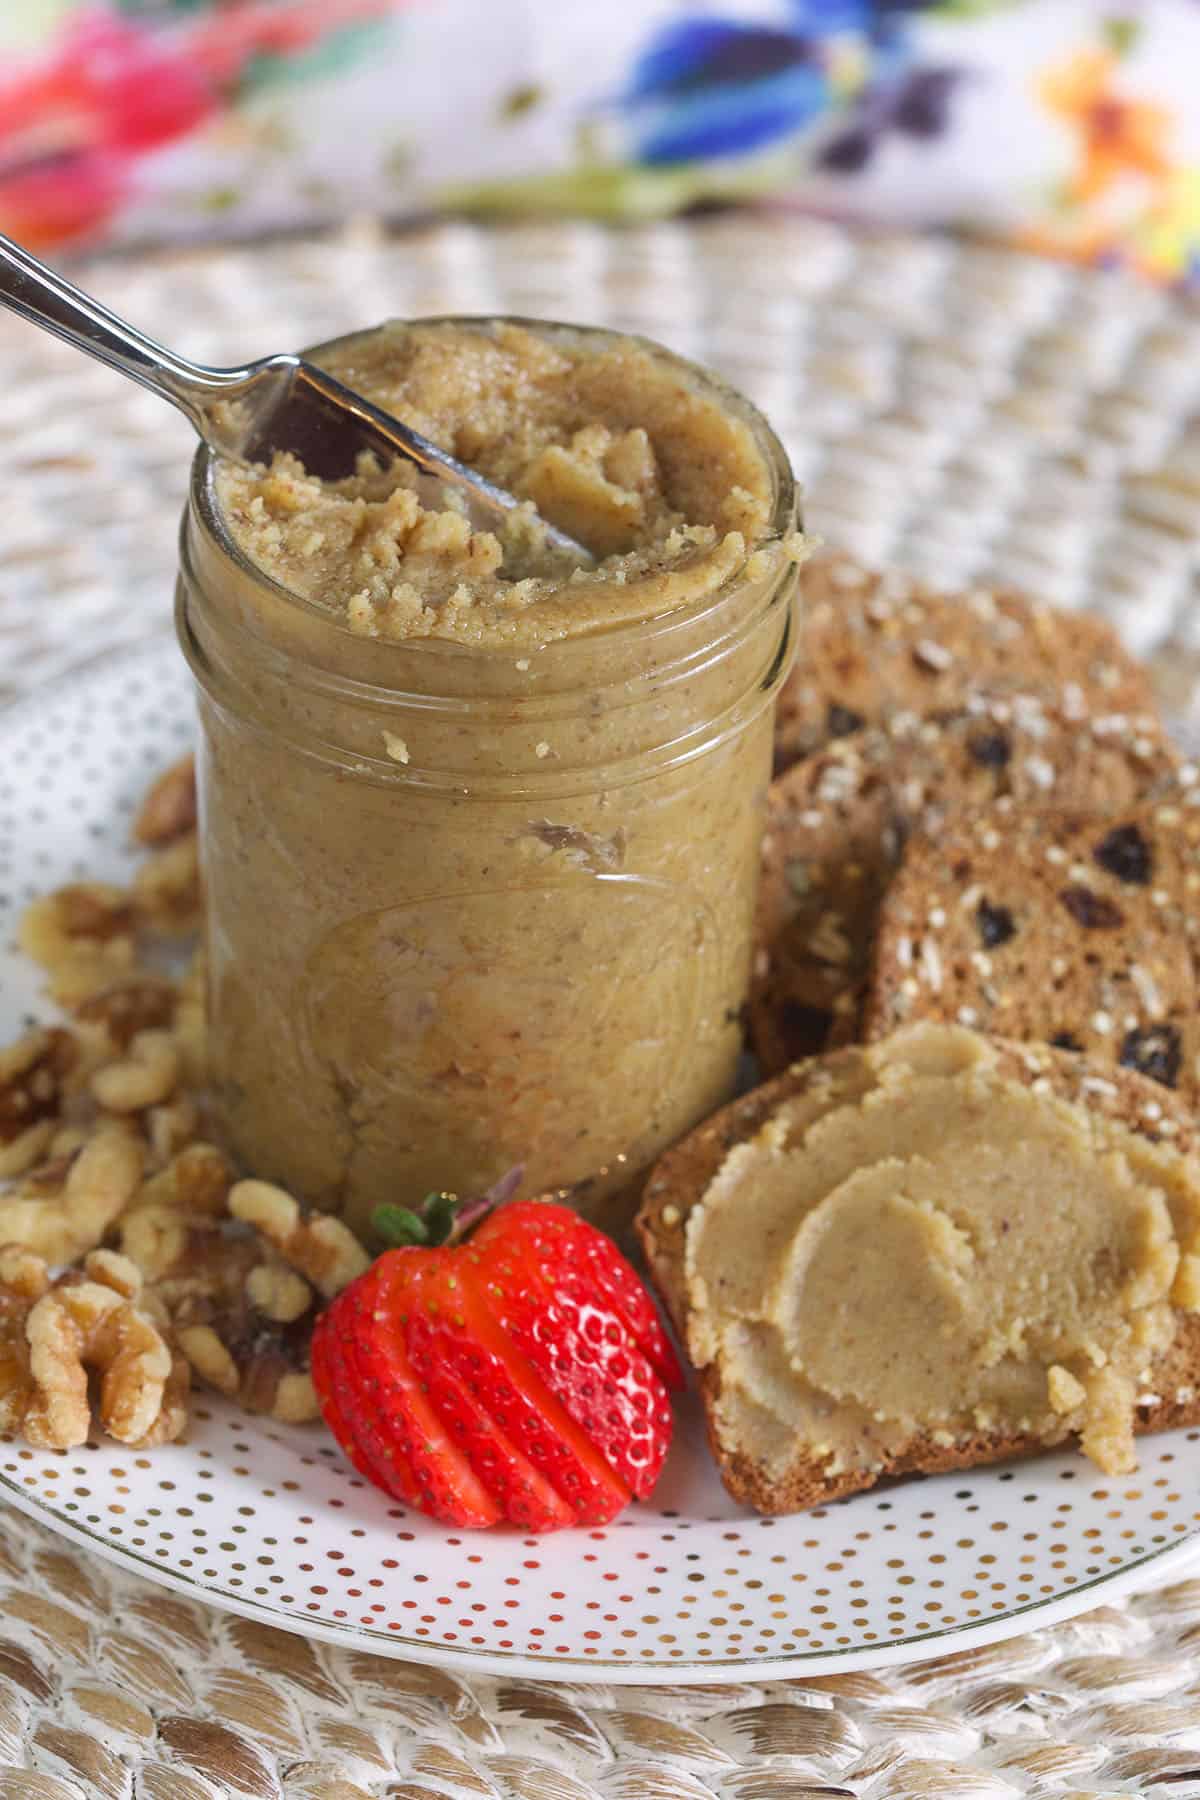 A jar of walnut butter is presented on a white plate next to strawberries and several slices of wheat bread.